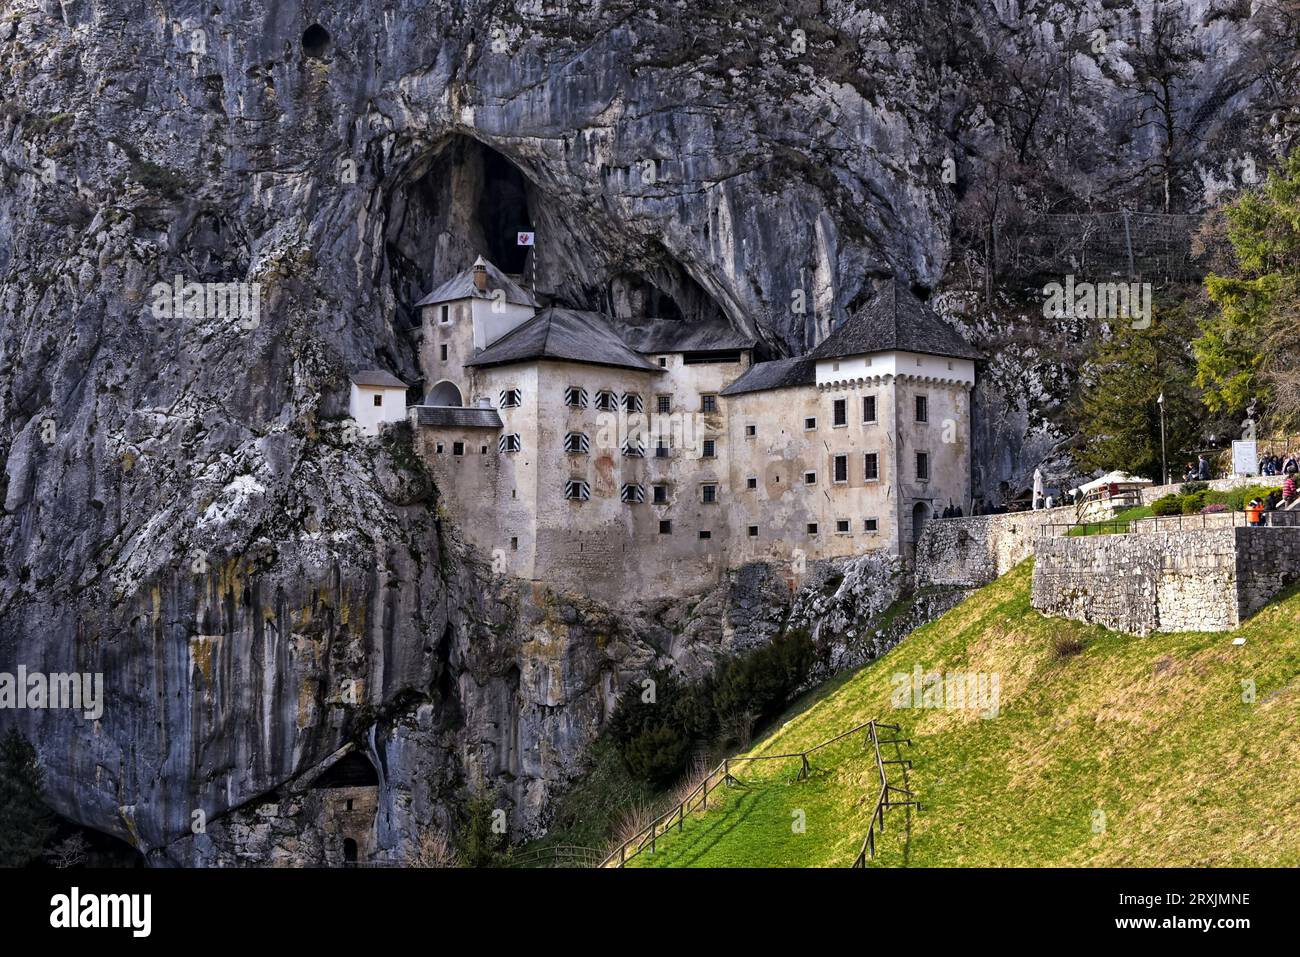 Predjama Castle, a 13th-century castle built in cliff face cave with dungeons and secret tunnels. Predjama, Slovenia Stock Photo